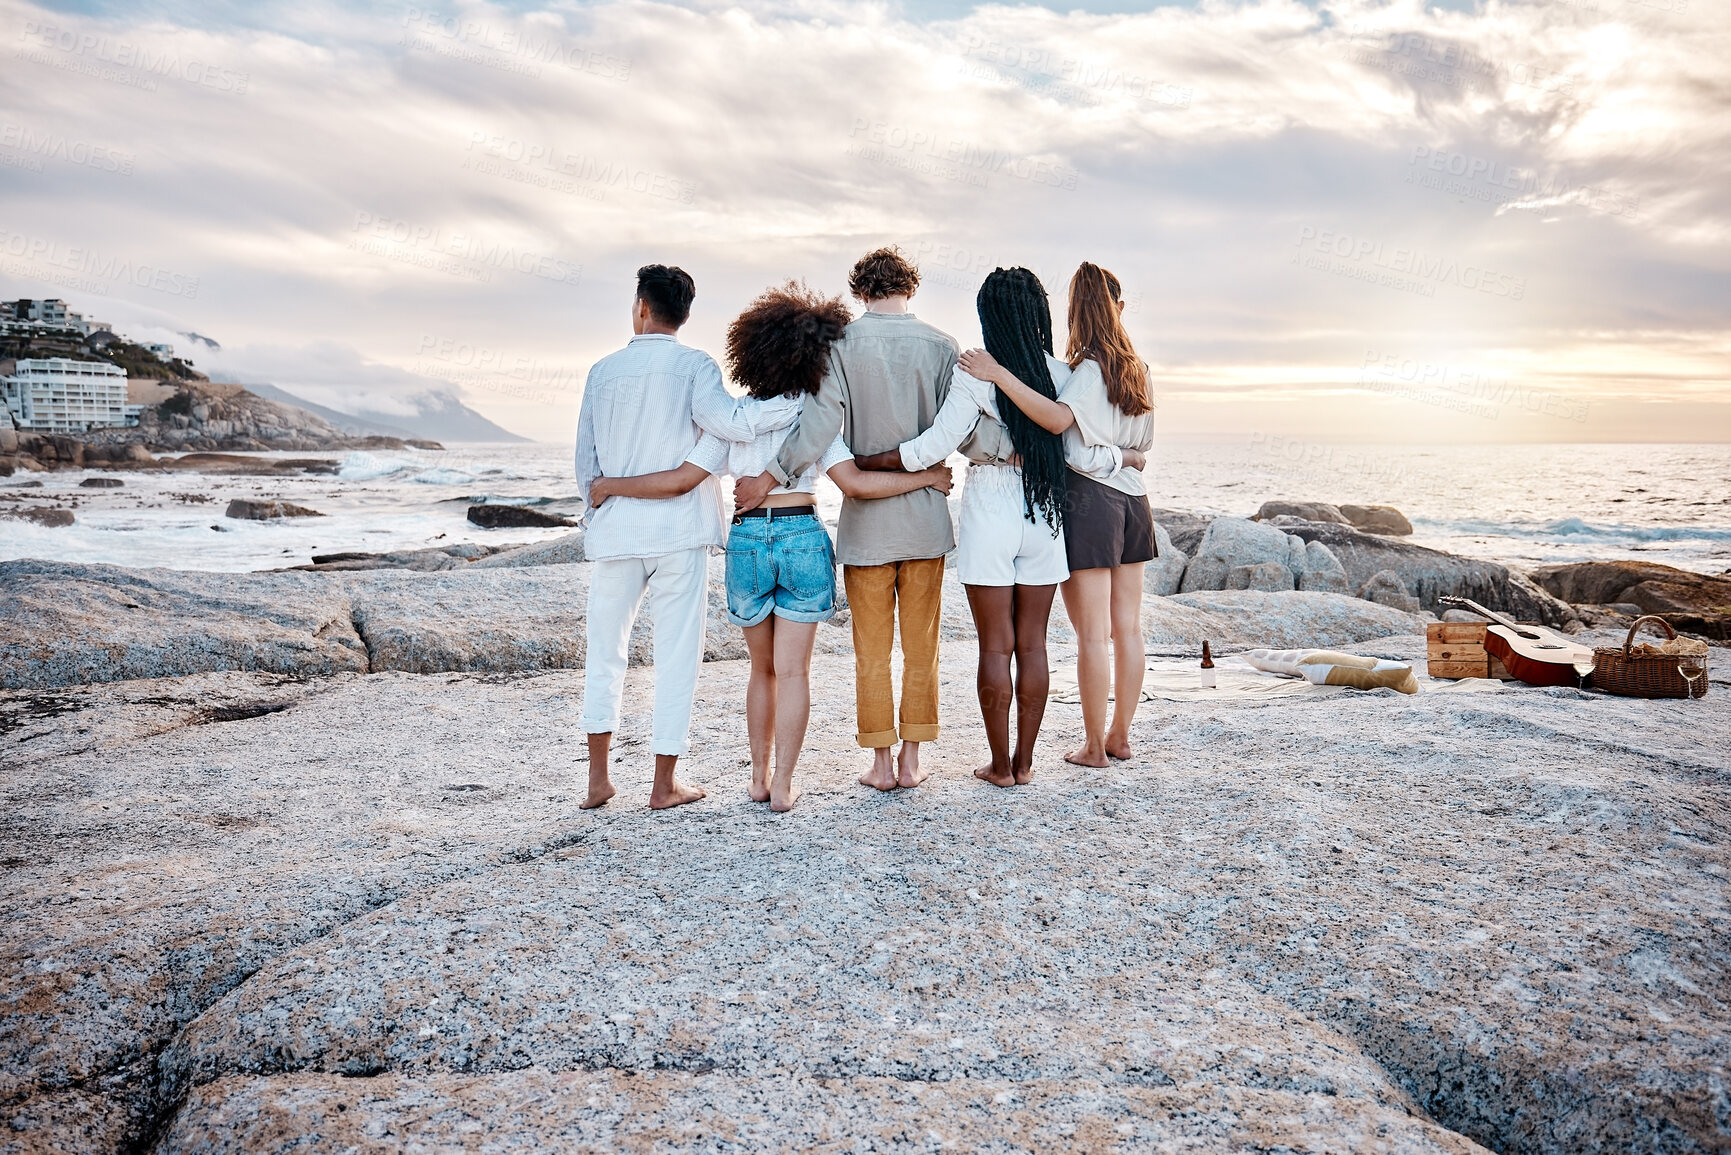 Buy stock photo Rear view of a Unknown group of friends enjoying their time together at the beach. Diverse group of friends huddling outdoors